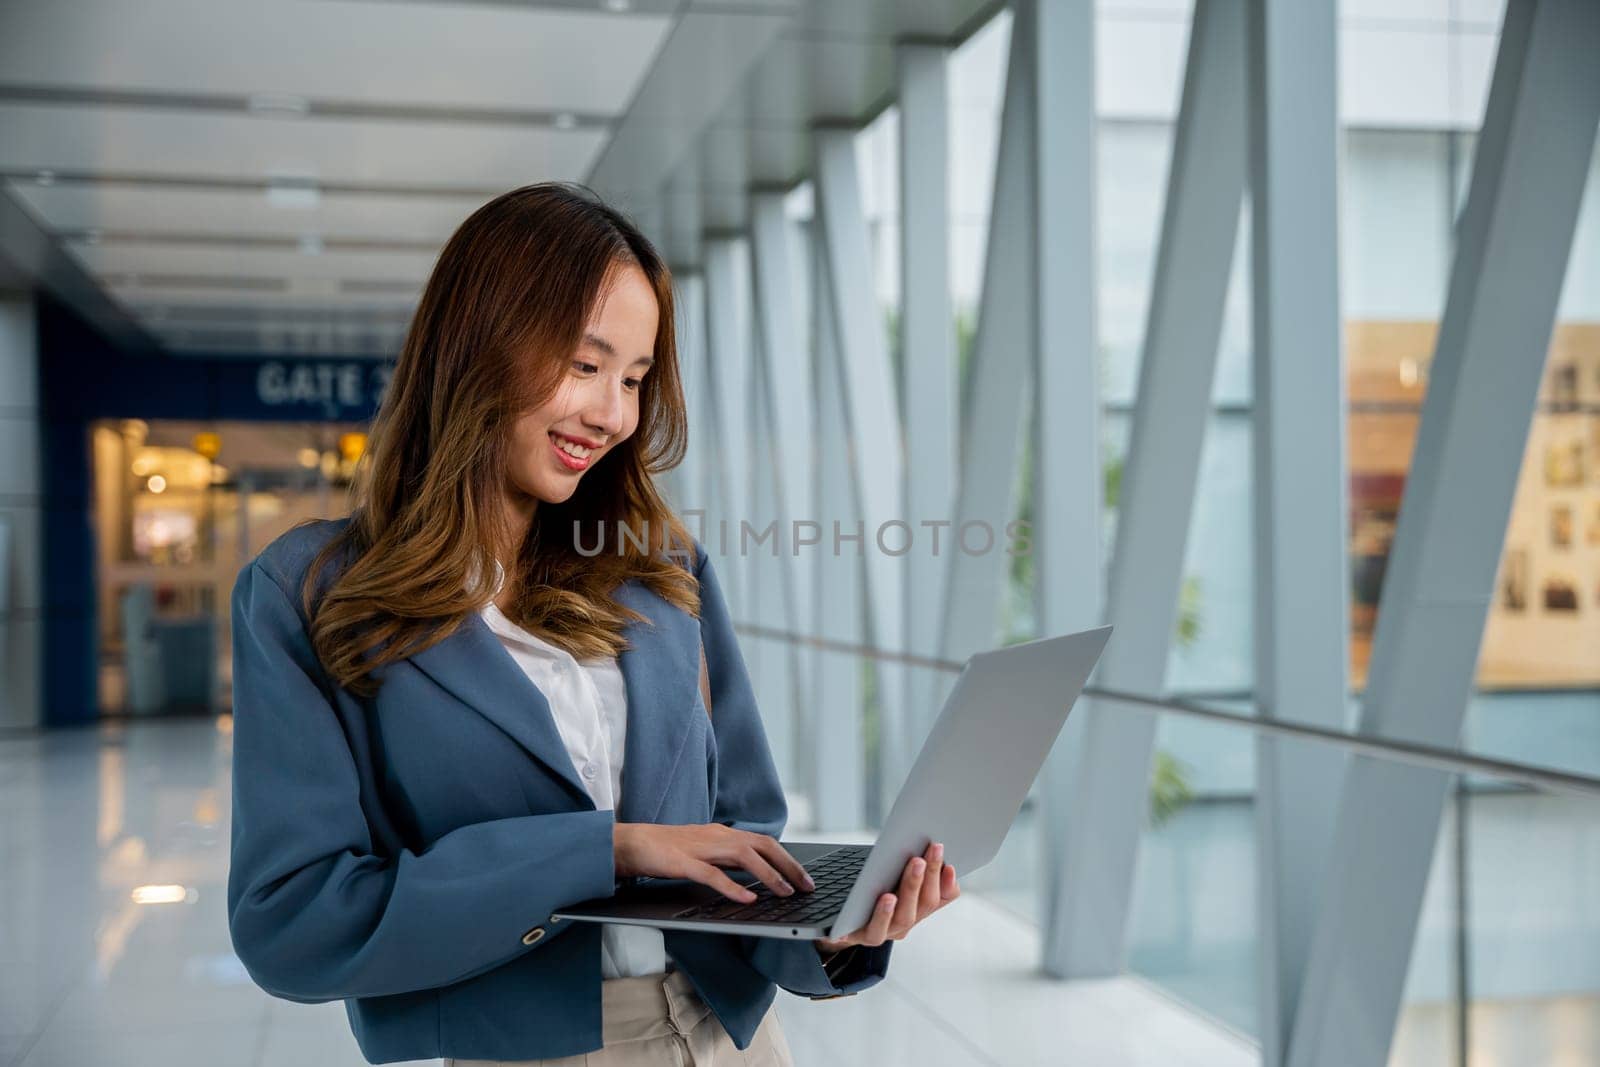 Smiling businesswoman using laptop and cellphone on park bench, enjoying outdoor work and leisure time in nature